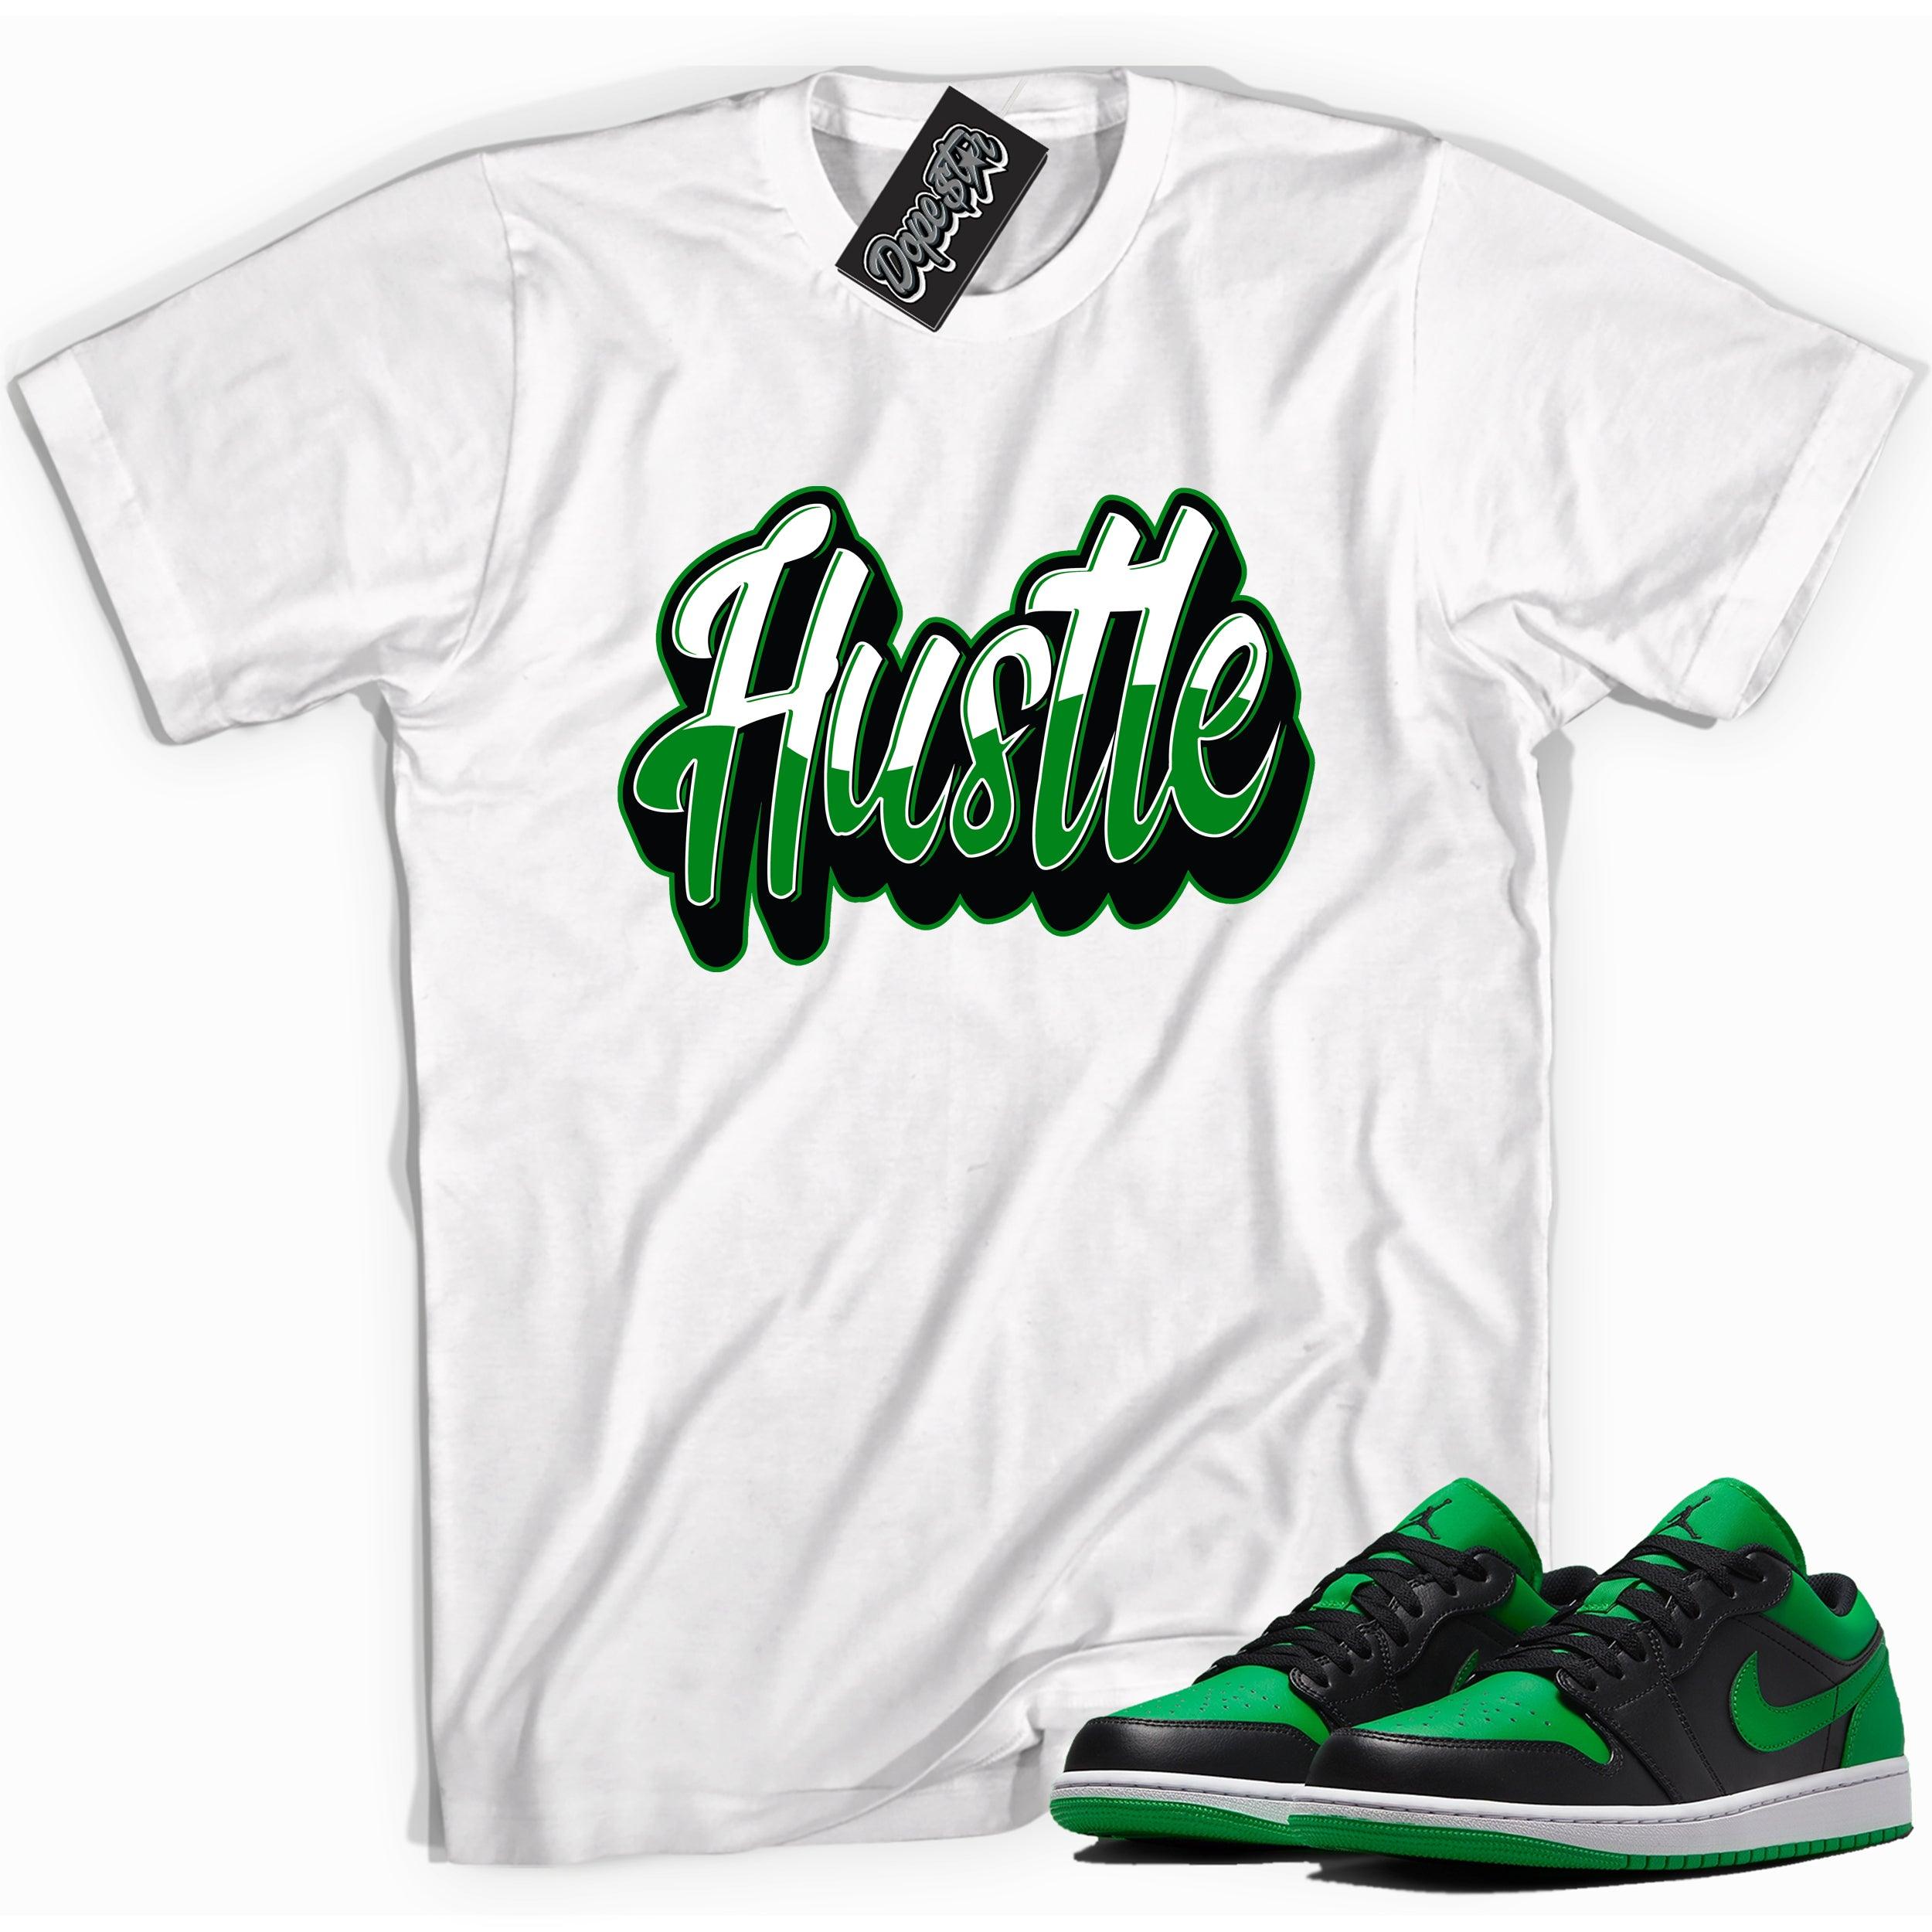 Cool white graphic tee with 'Hustle' print, that perfectly matches Air Jordan 1 Low Lucky Green sneakers